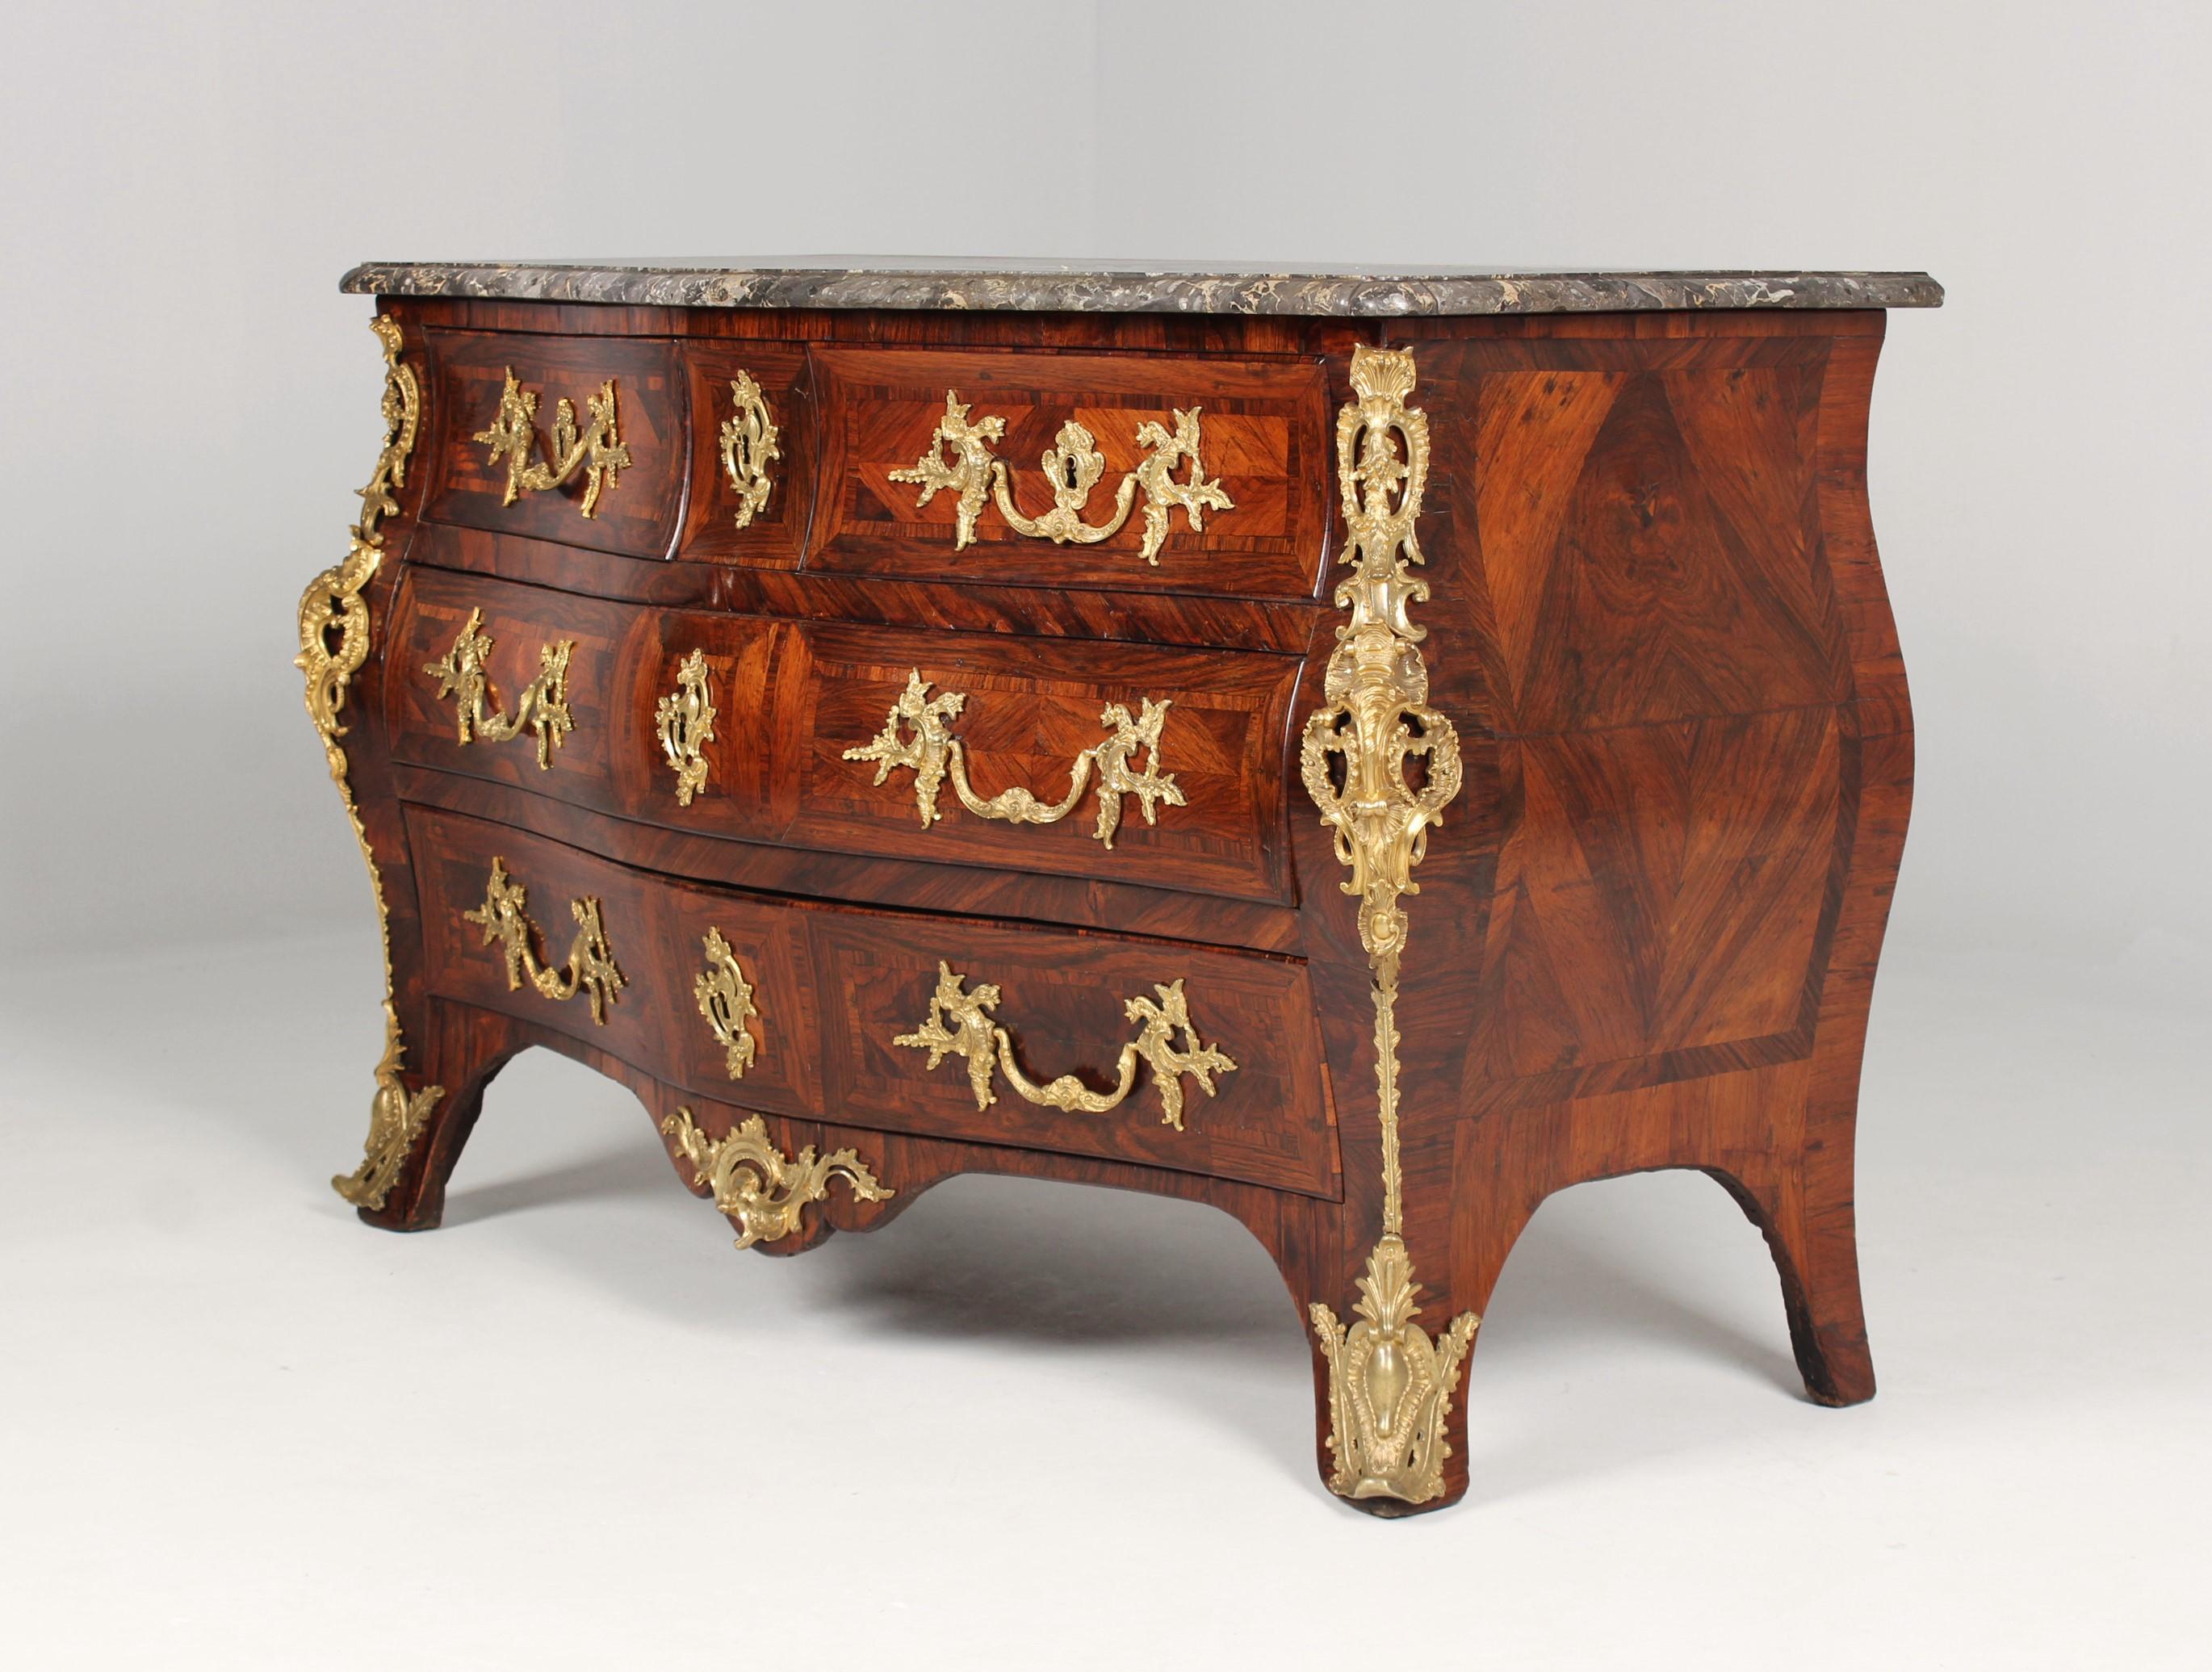 Antique Louis XV chest of drawers with fire-gilt fittings

Paris around 1750

Dimensions: H x W x D: 85 x 132 x 64 cm

Description:
Very beautifully crafted and absolutely collectible French chest of drawers from the mid-18th century with fittings